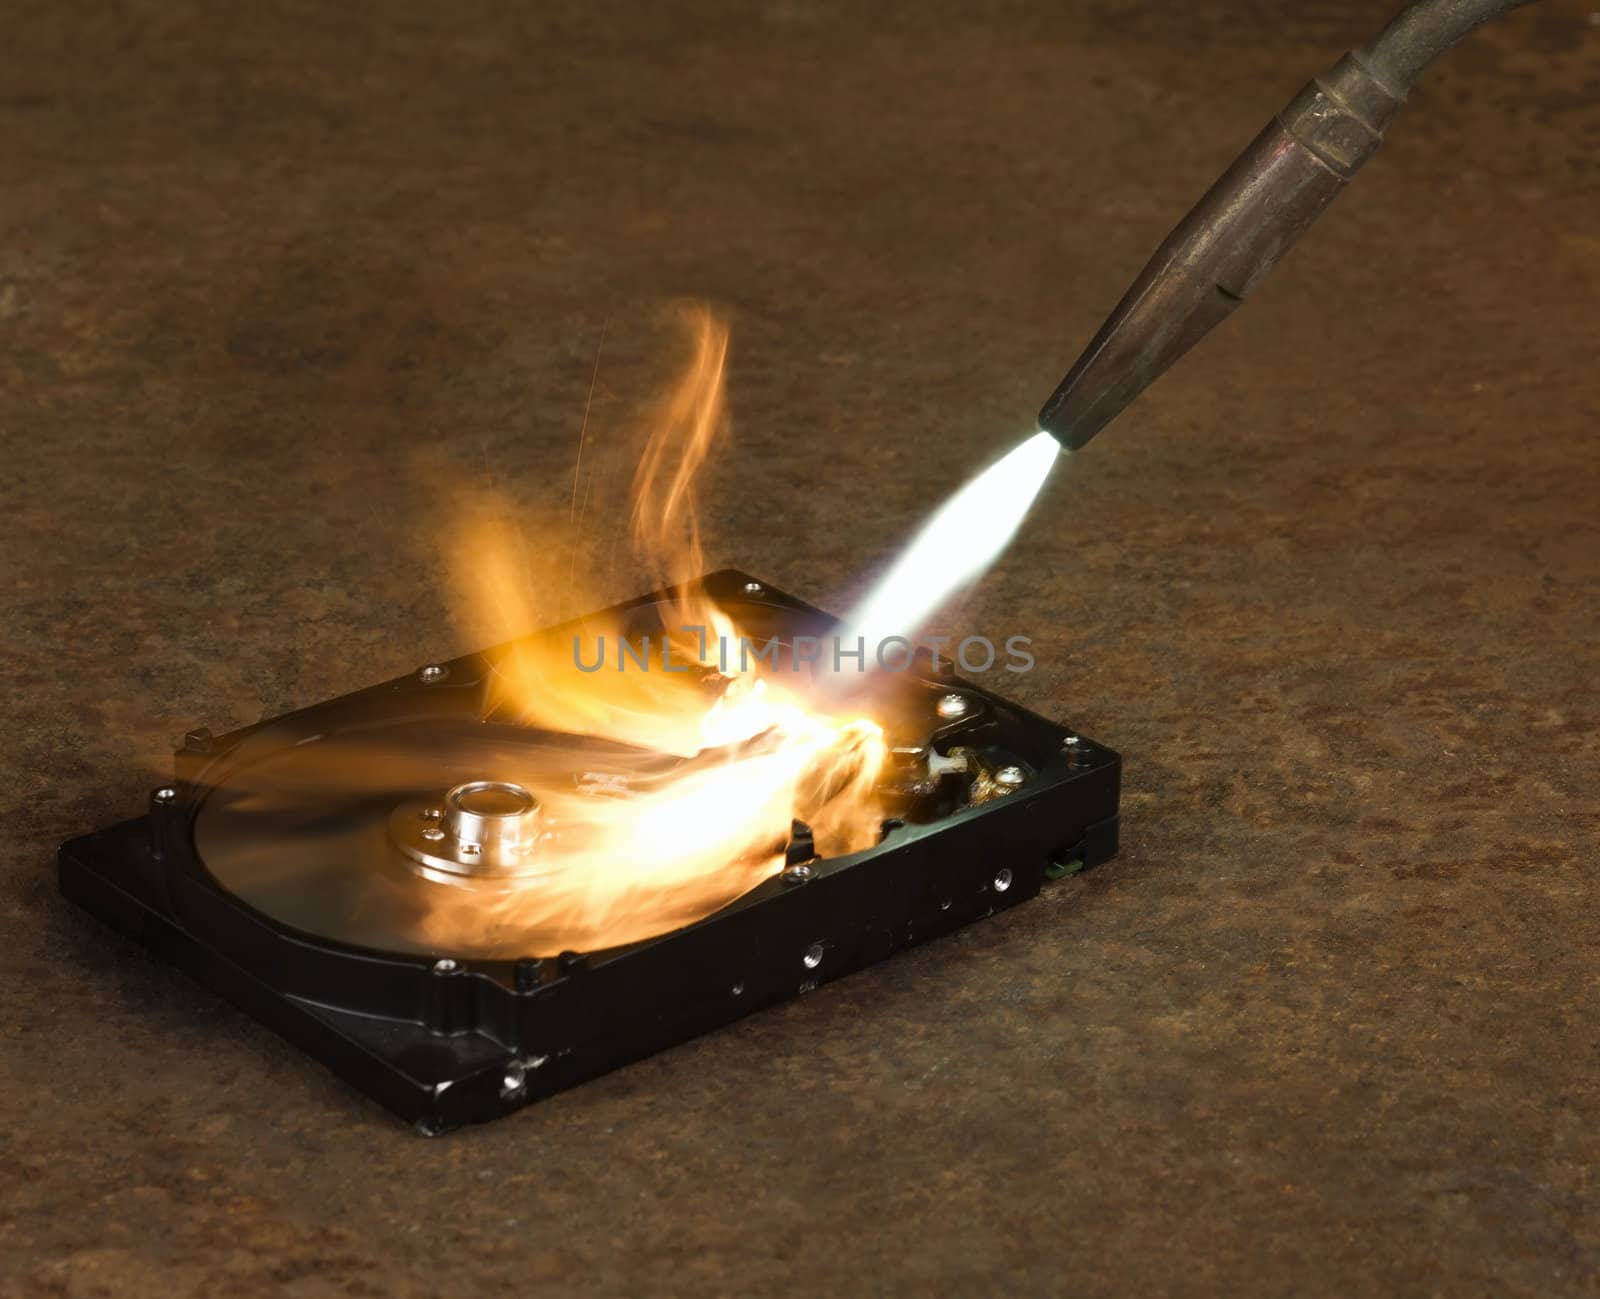 burning a hard disk drive with a welding torch in rusty background